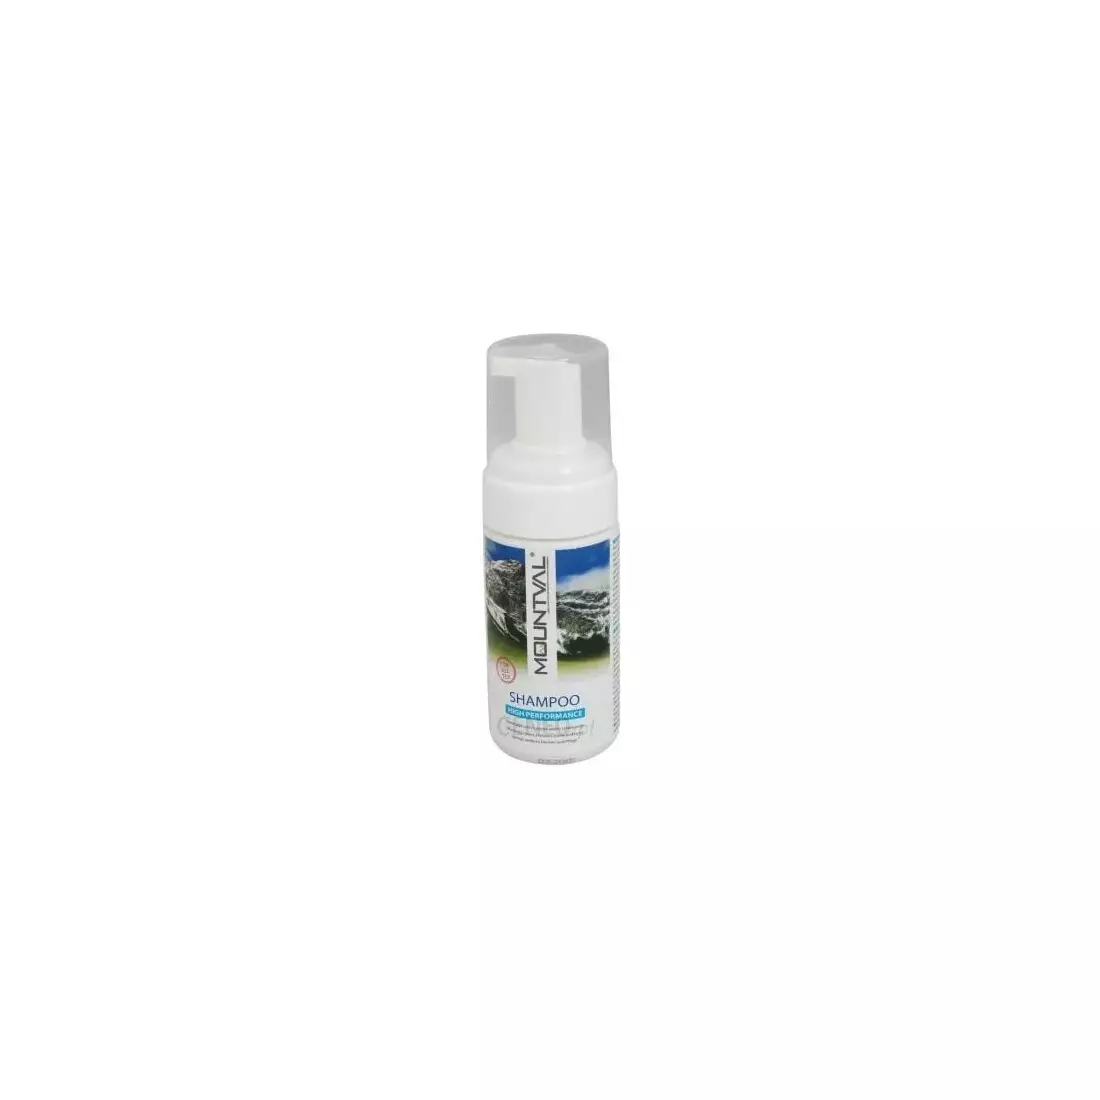 MOUNTVAL SHAMPOO cleaning foam for leather and textiles, 100ml